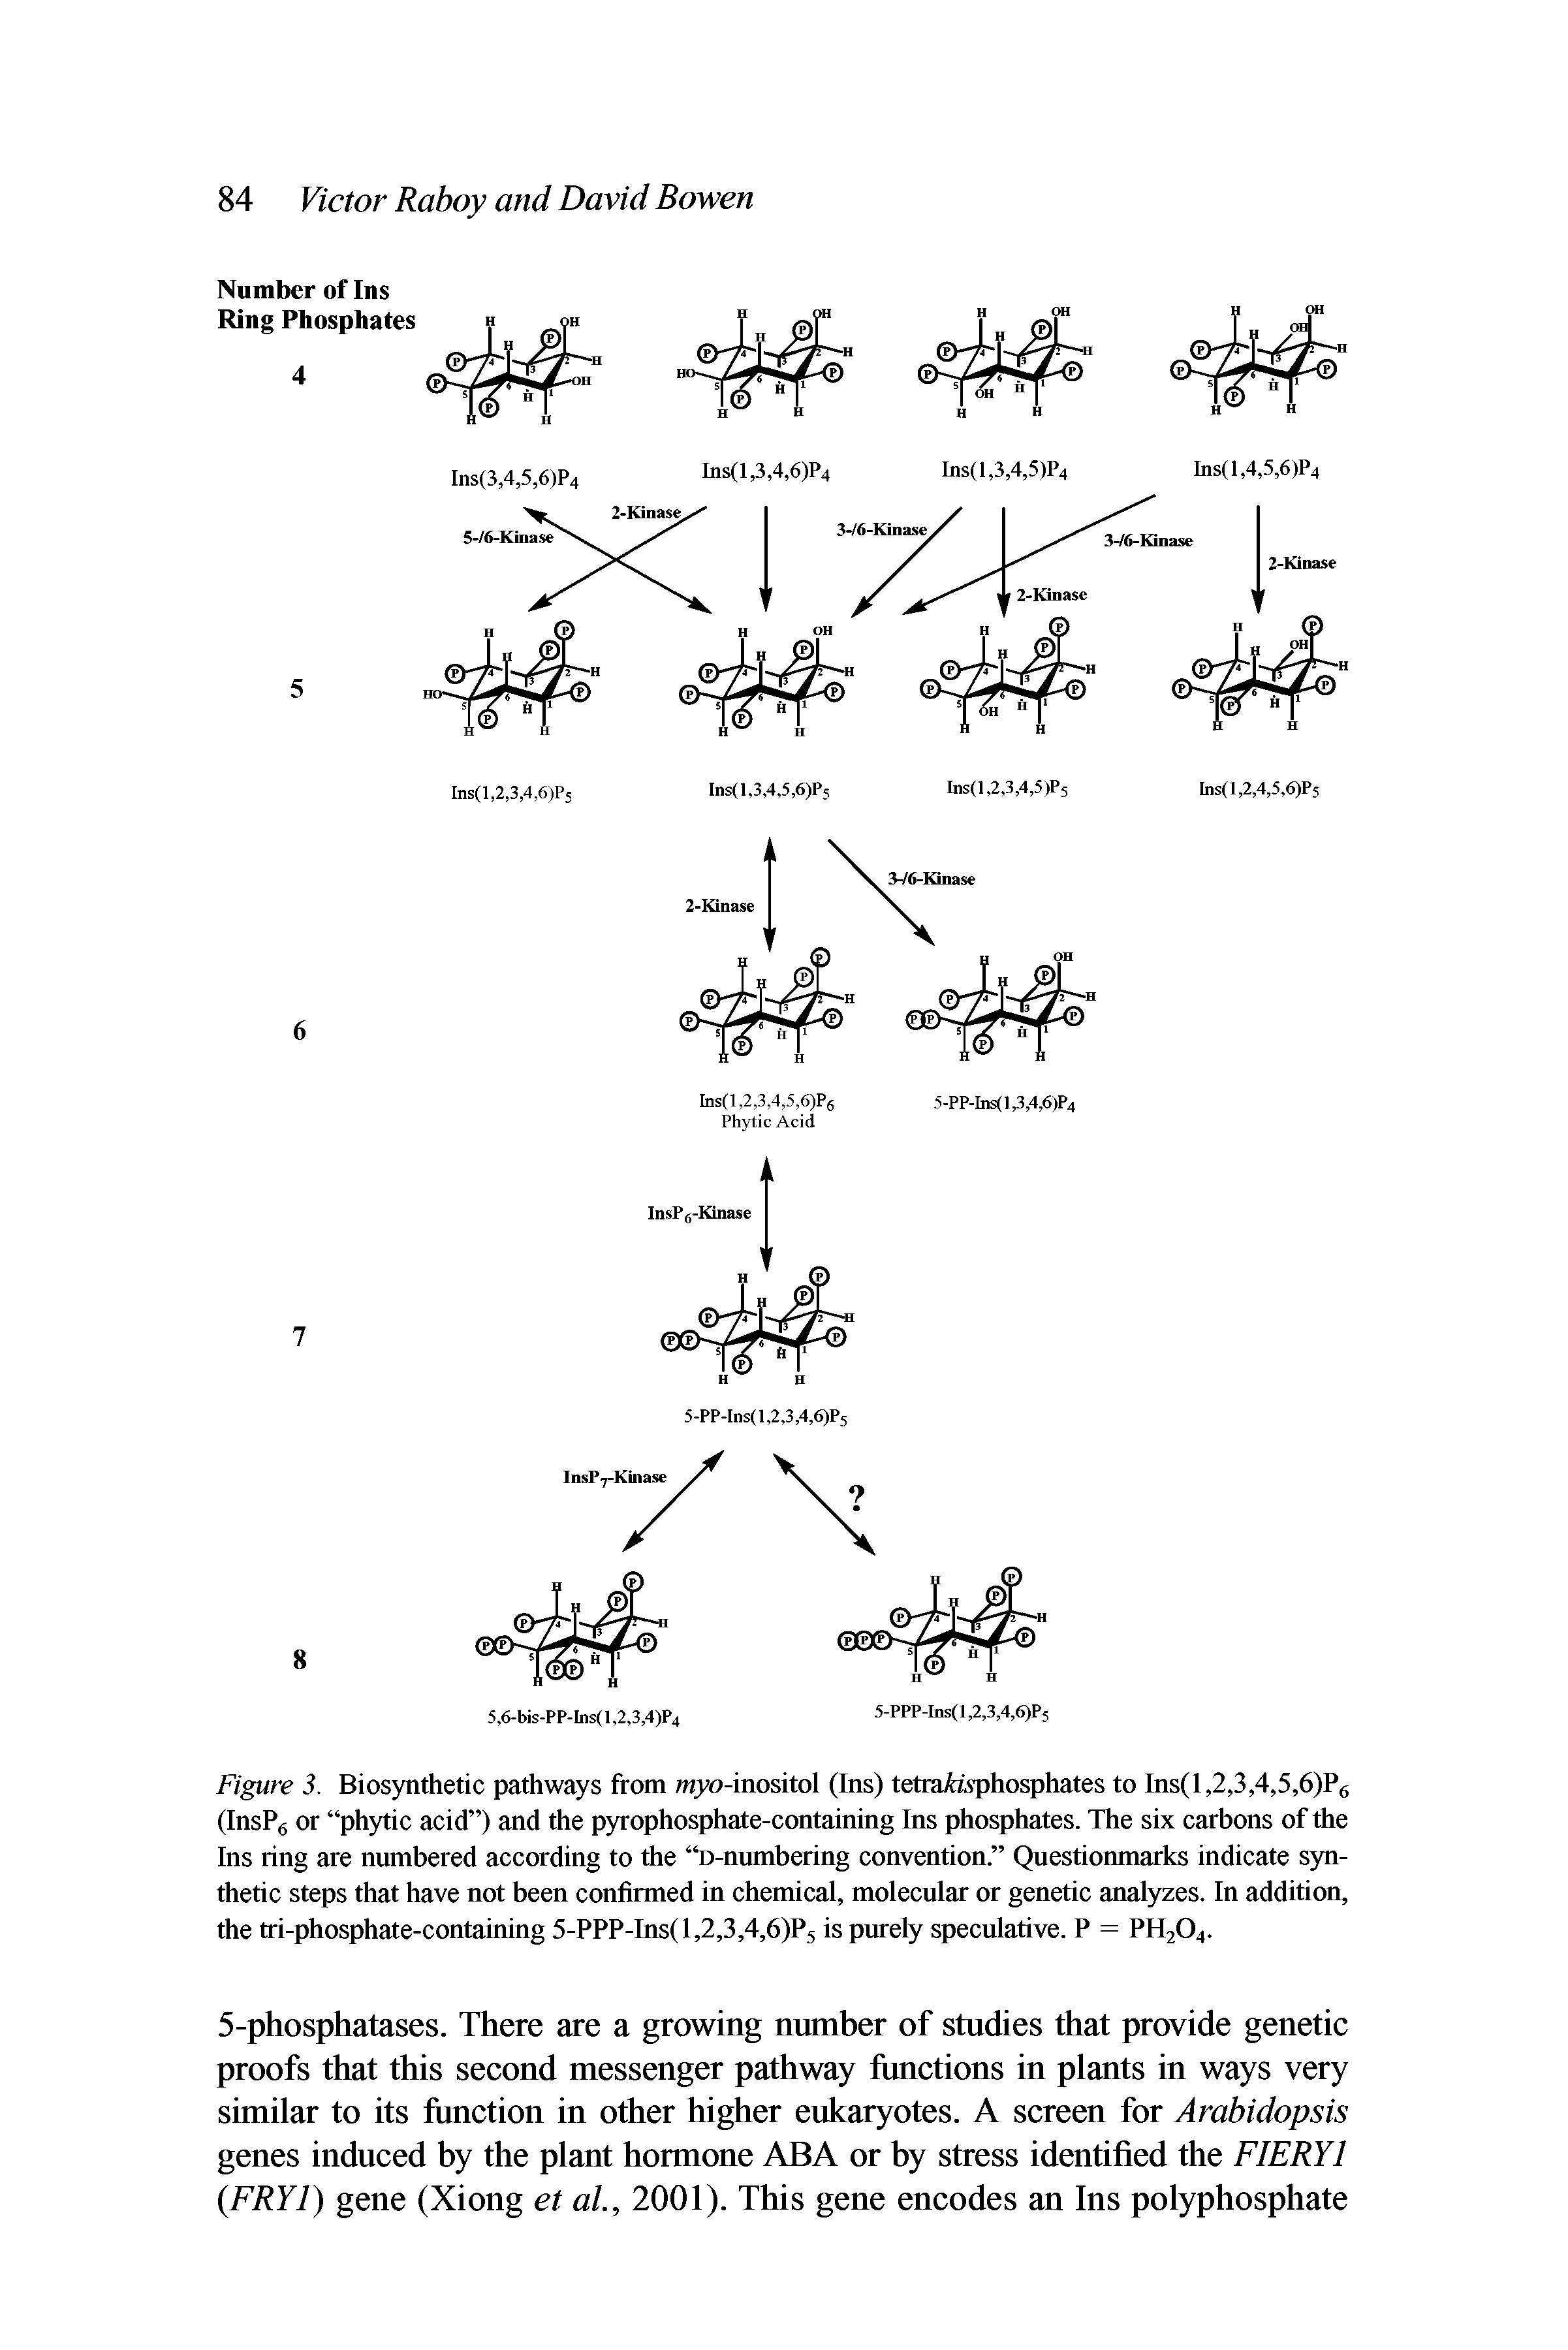 Figure 3. Biosynthetic pathways from wyo-inositol (Ins) tetrad/,vphosphates to Ins(l,2,3,4,5,6)P6 (InsP6 or phytic acid ) and the pyrophosphate-containing Ins phosphates. The six carbons of the Ins ring are numbered according to the D-numbering convention. Questionmarks indicate synthetic steps that have not been confirmed in chemical, molecular or genetic analyzes. In addition, the tri-phosphate-containing 5-PPP-Ins(l,2,3,4,6)P5 is purely speculative. P = PH204.